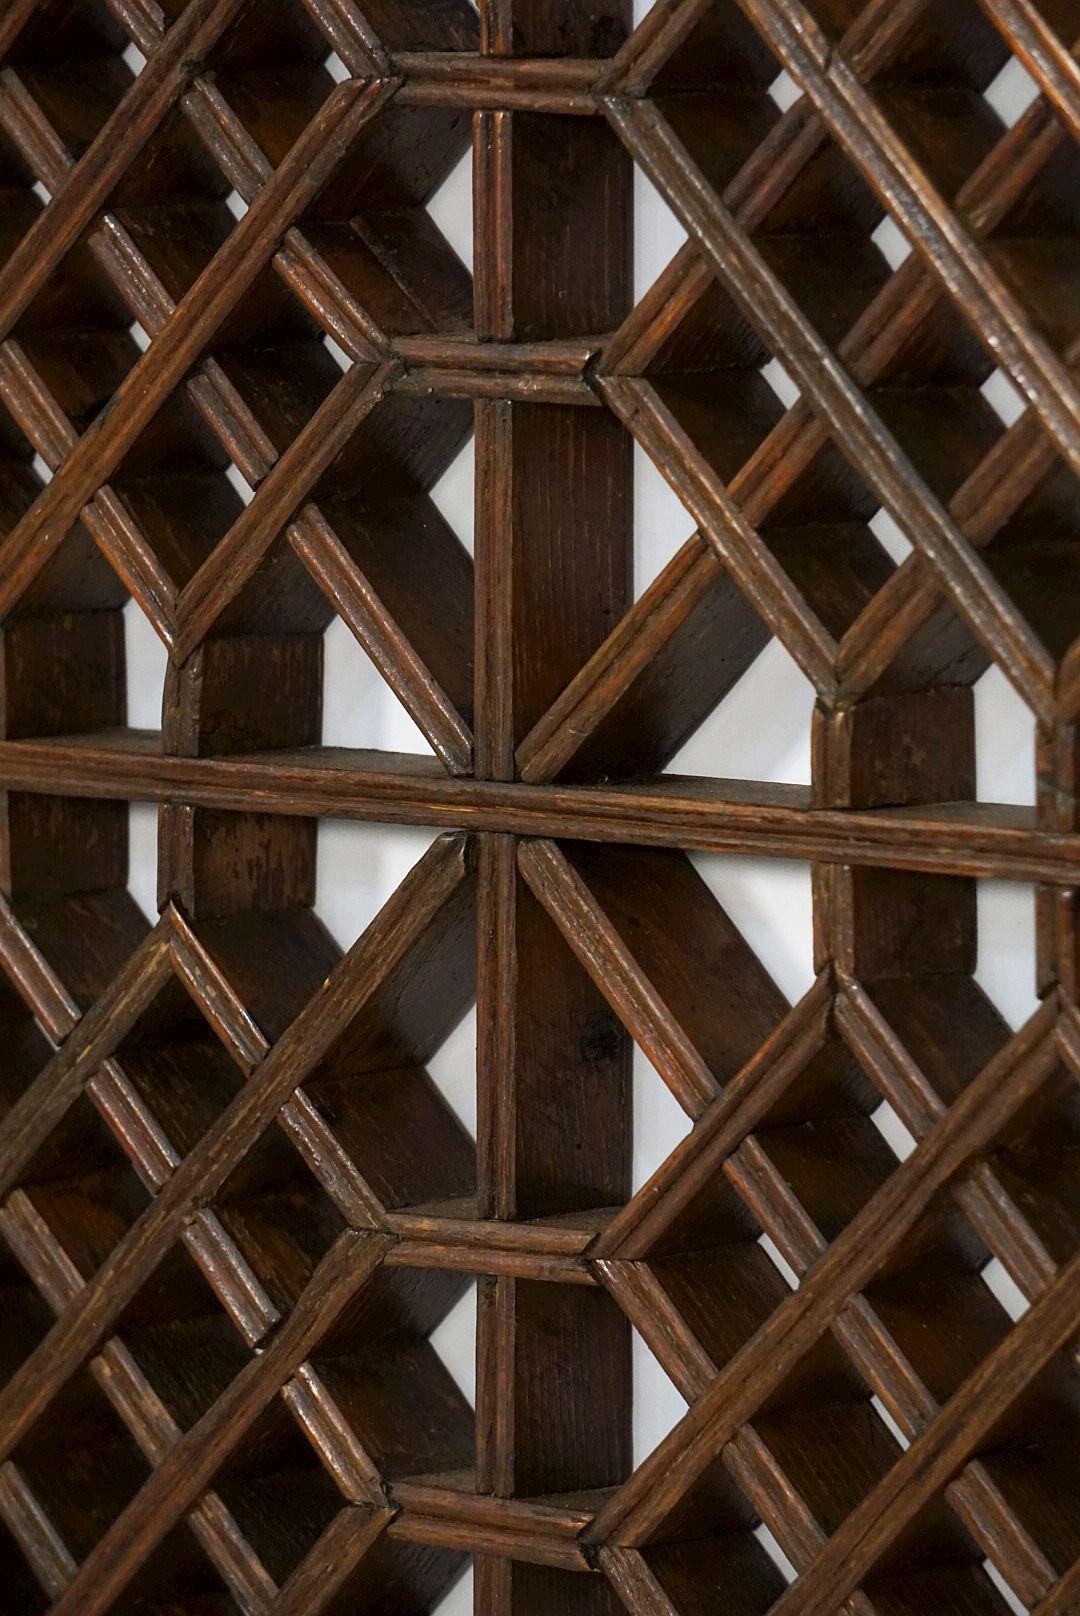 Chinese Decorative Lattice Wood Panels or Window Screens - Sold as a Set 3